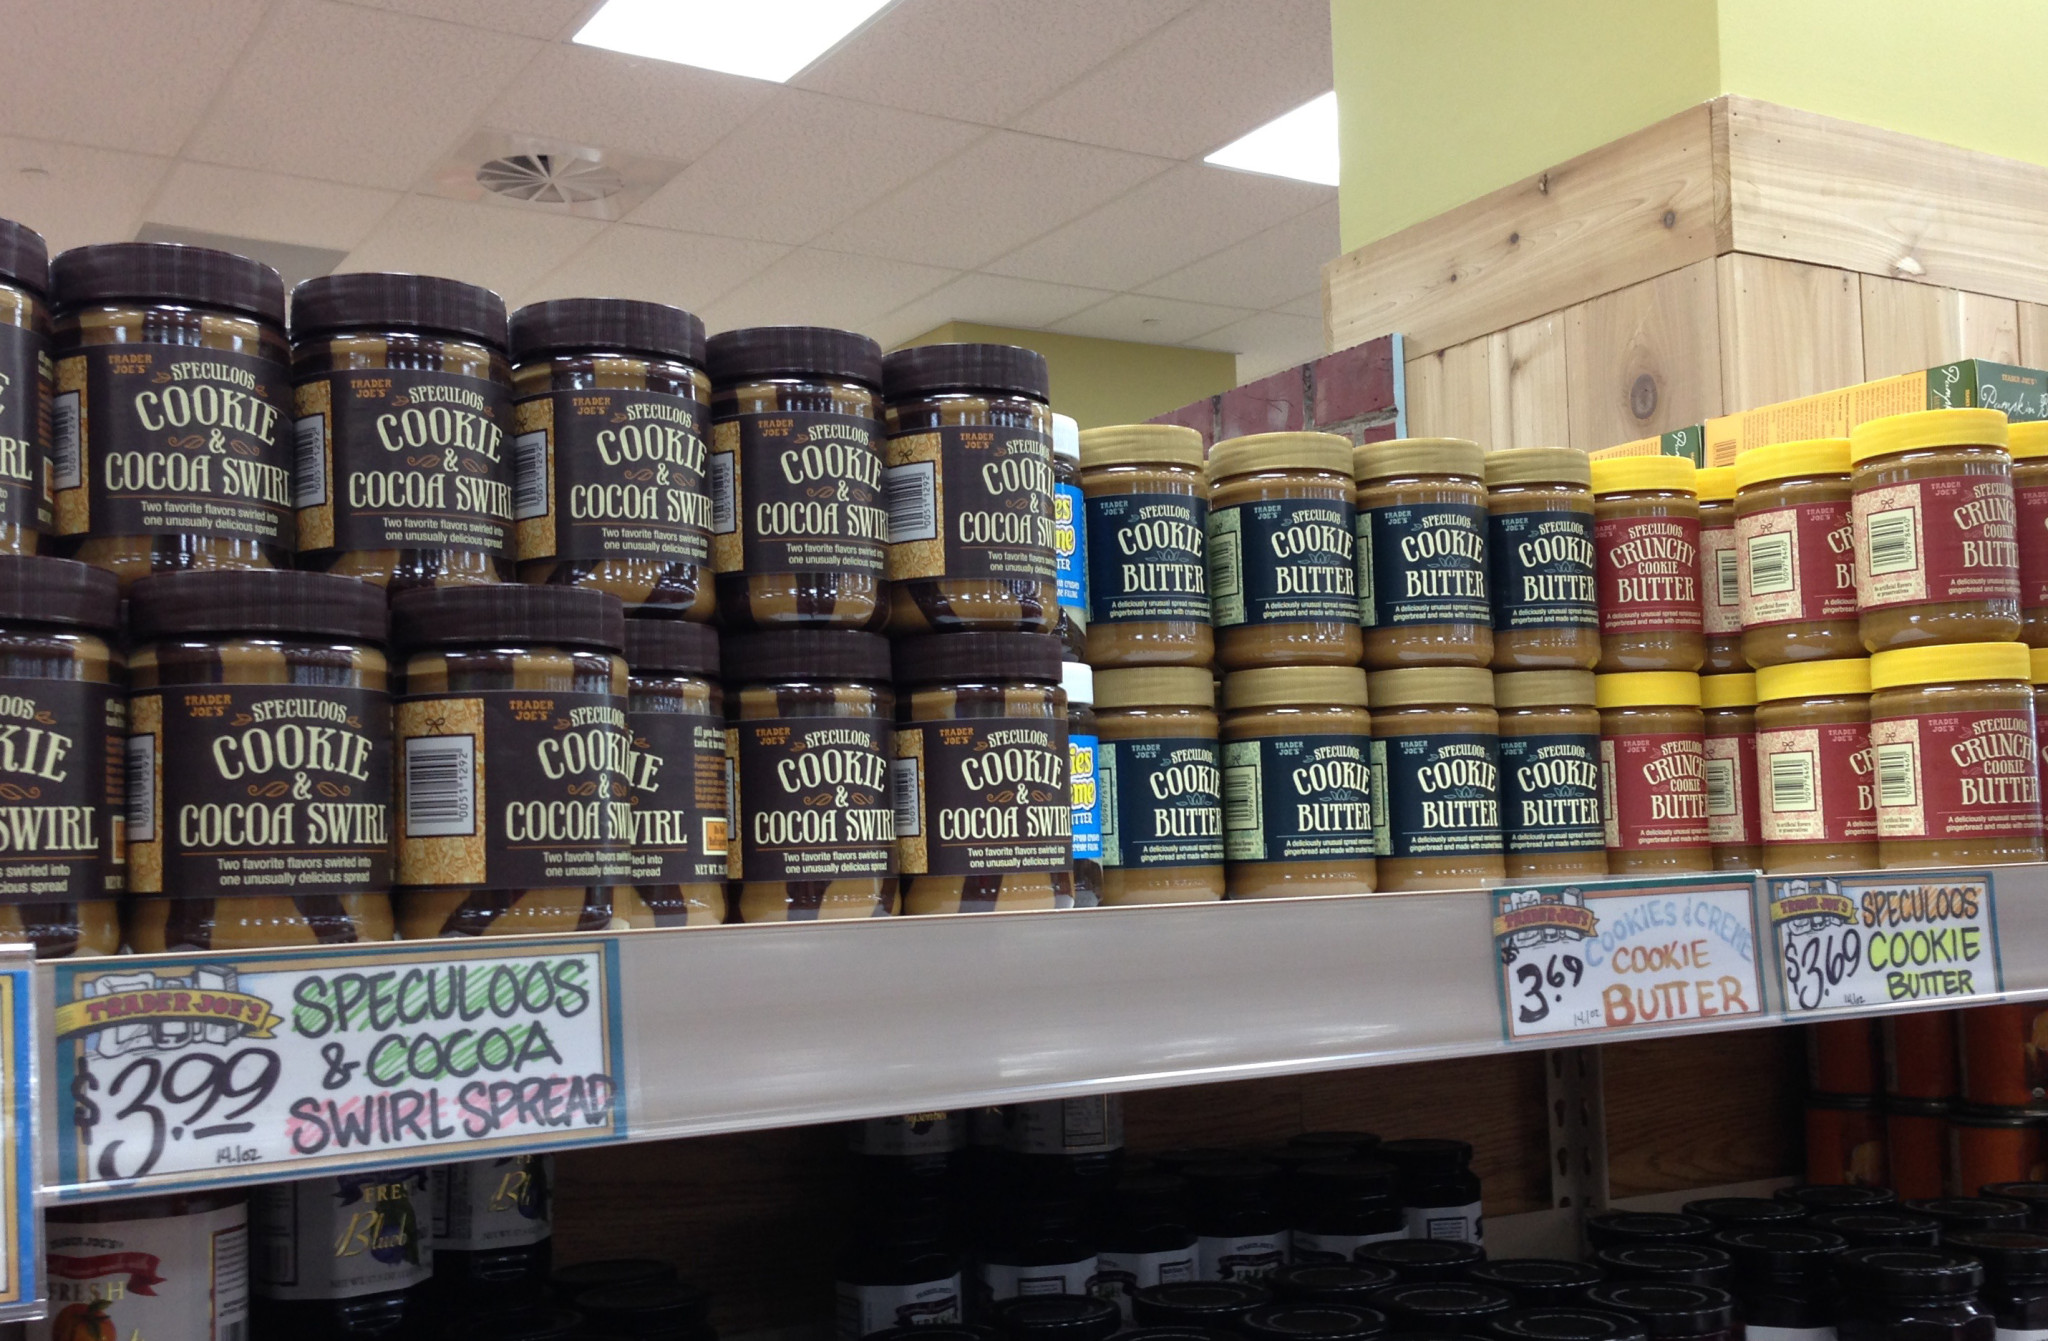 Trader Joe's - If You Need Me I'll Be On The Cookie Butter Aisle